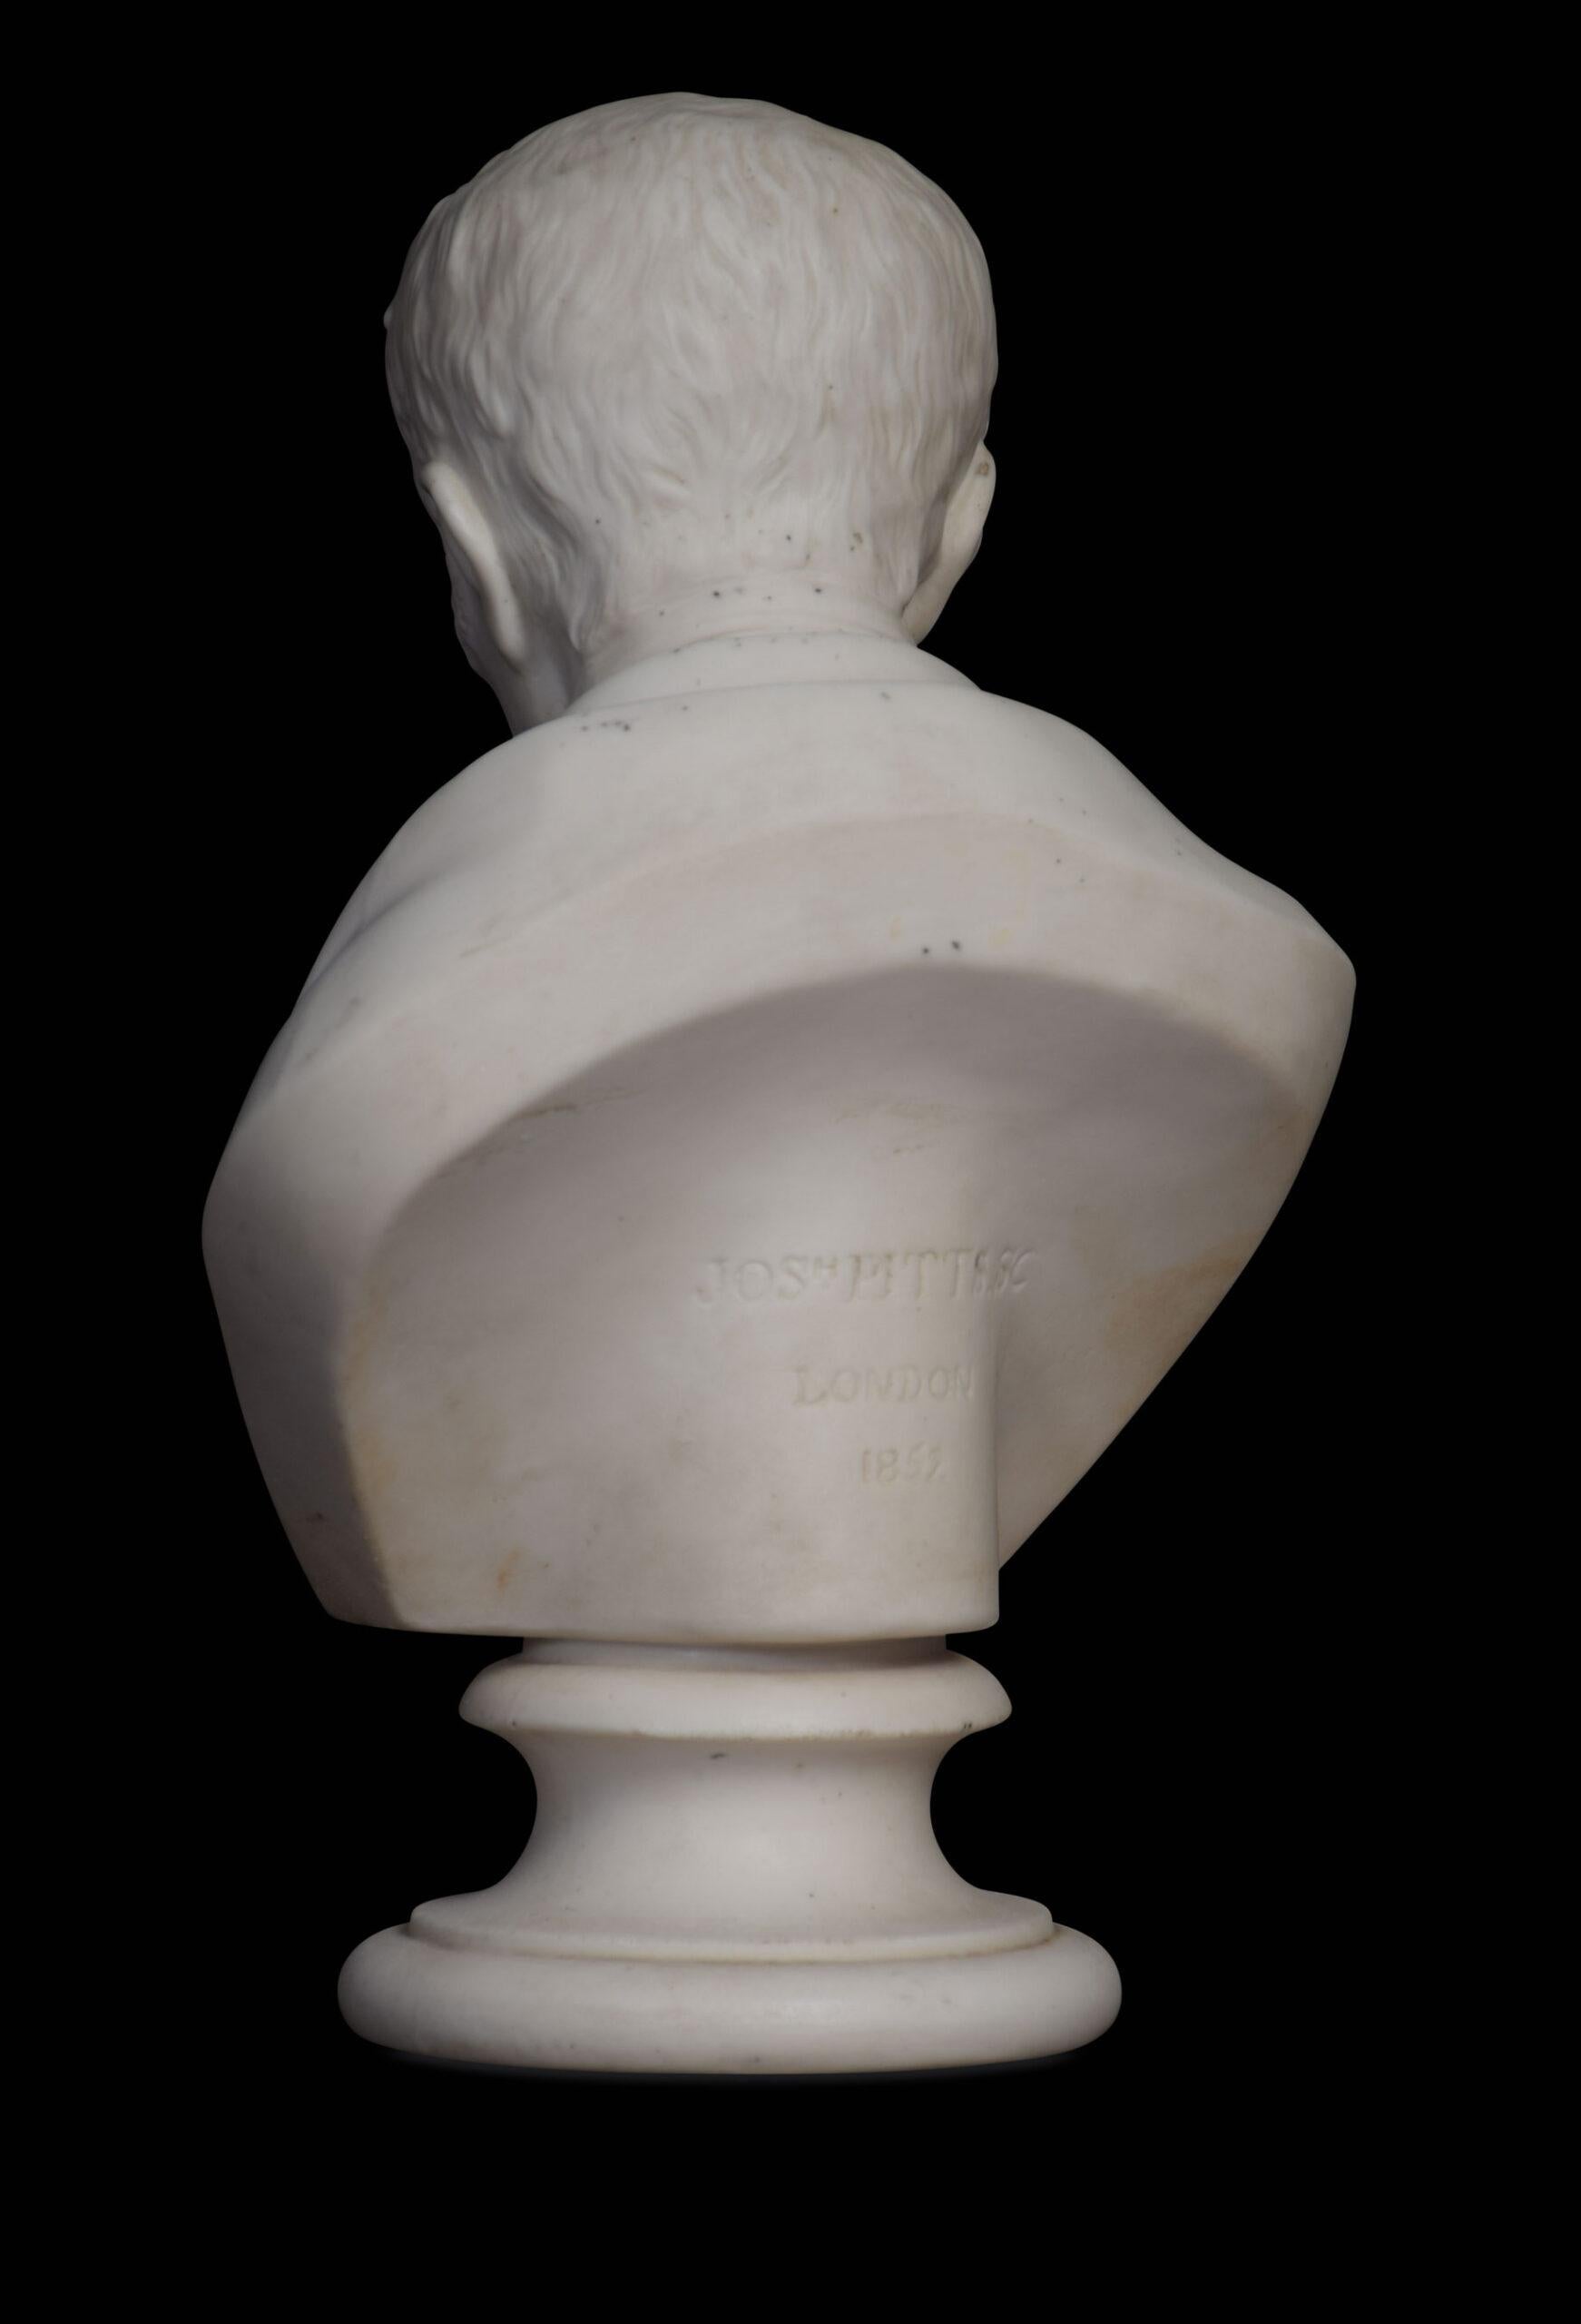 Parian bust of the Duke of Wellington, on a short-waisted socle, stamped Jos Pitts Sc London.
Dimensions:
Height 9.5 inches
Width 6 inches
Depth 3.5 inches.